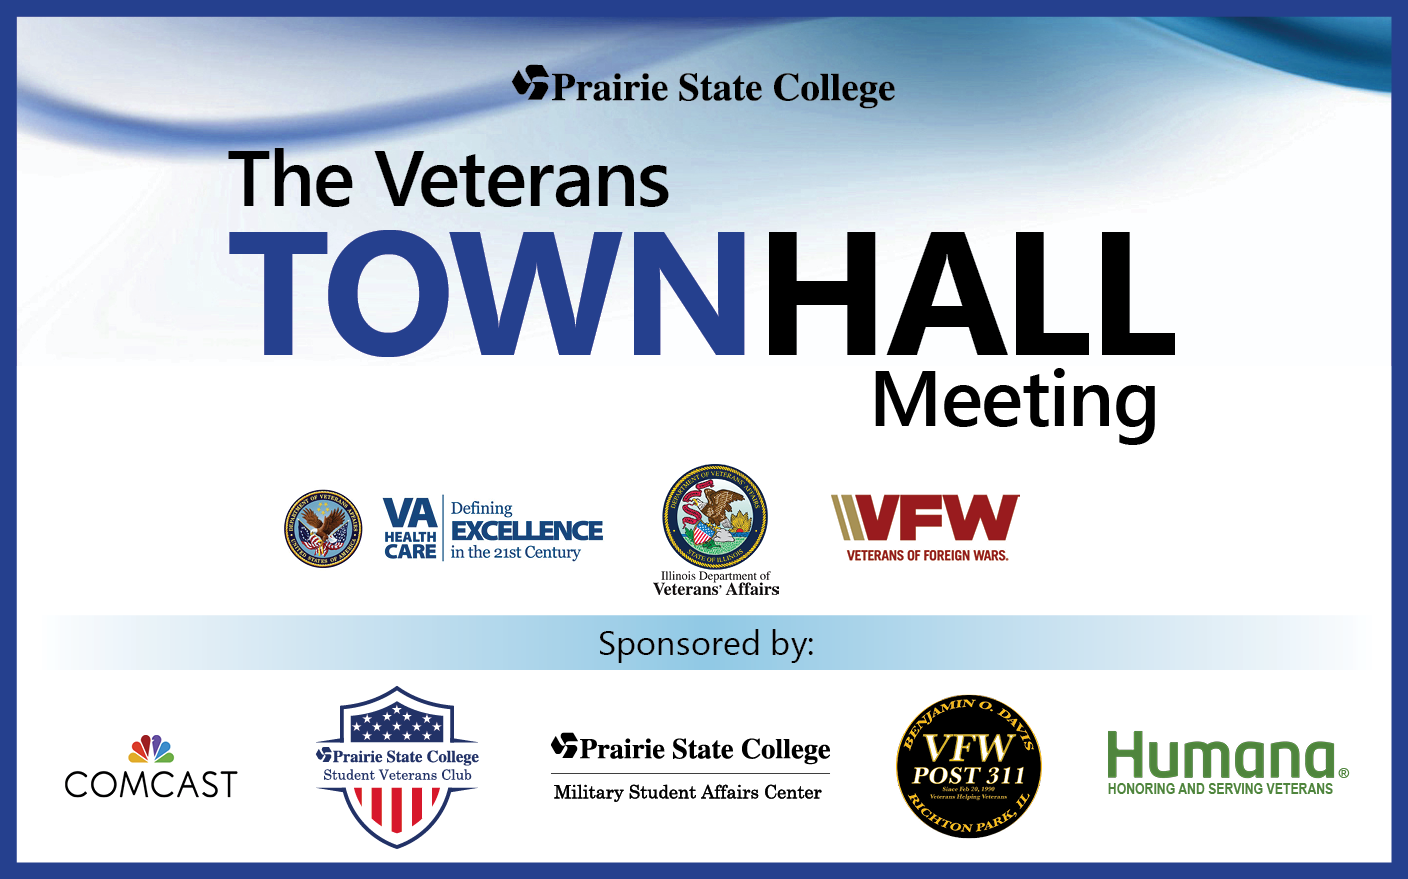 The Veterans Townhall Meeting